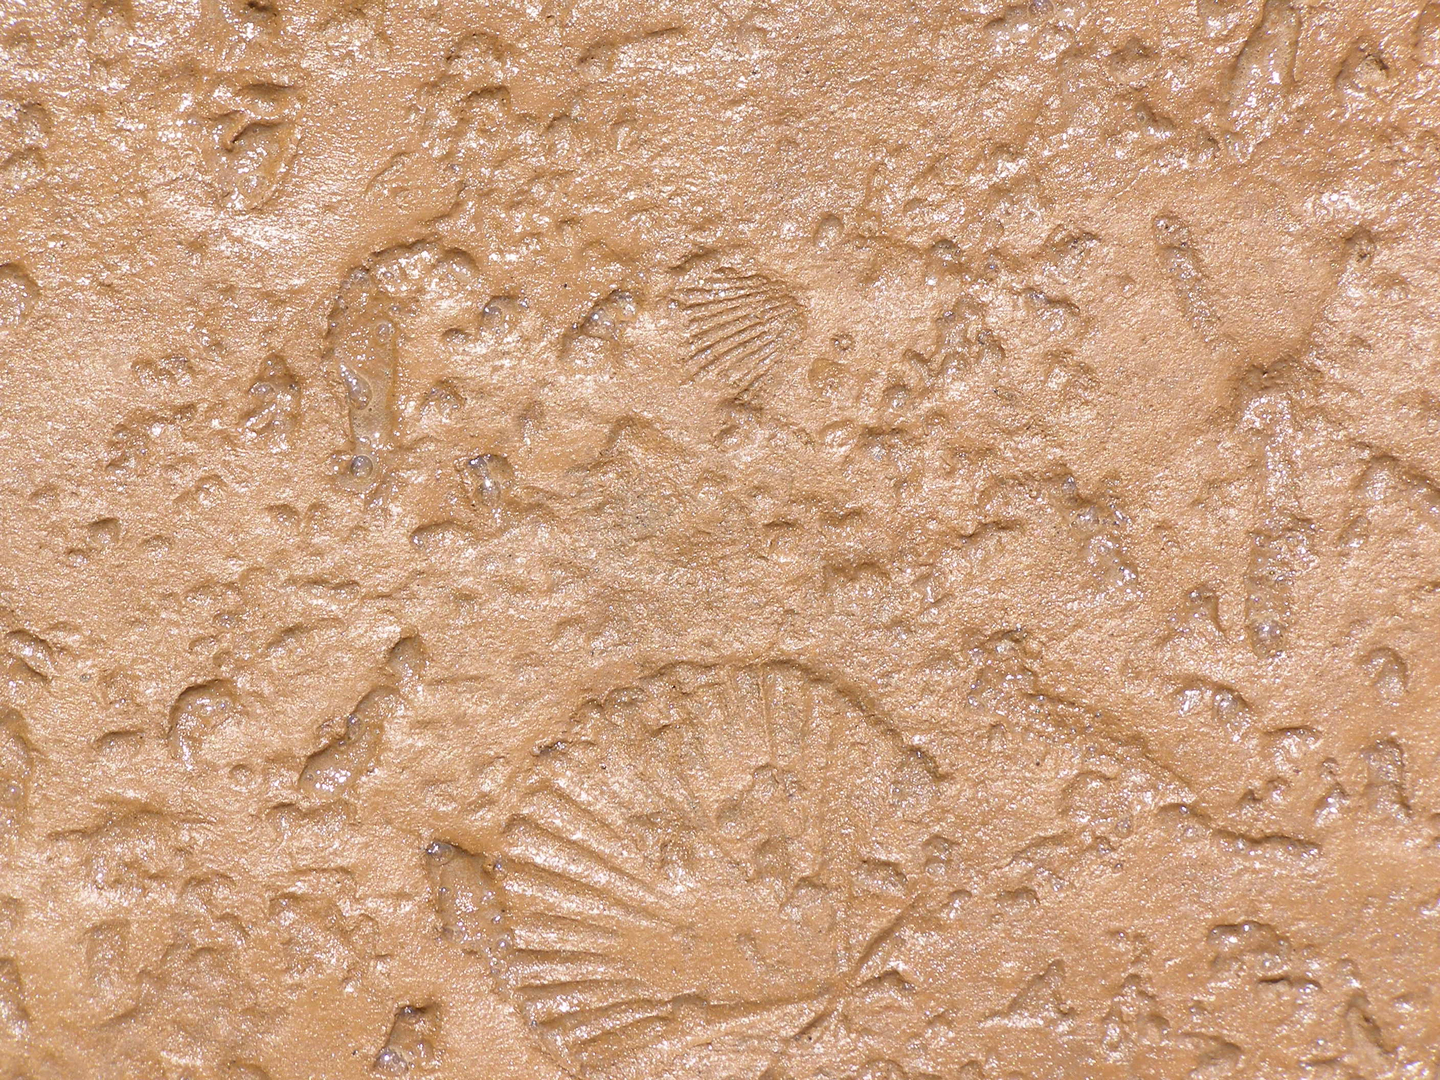 Wet Concrete With Shells and Stone Printed